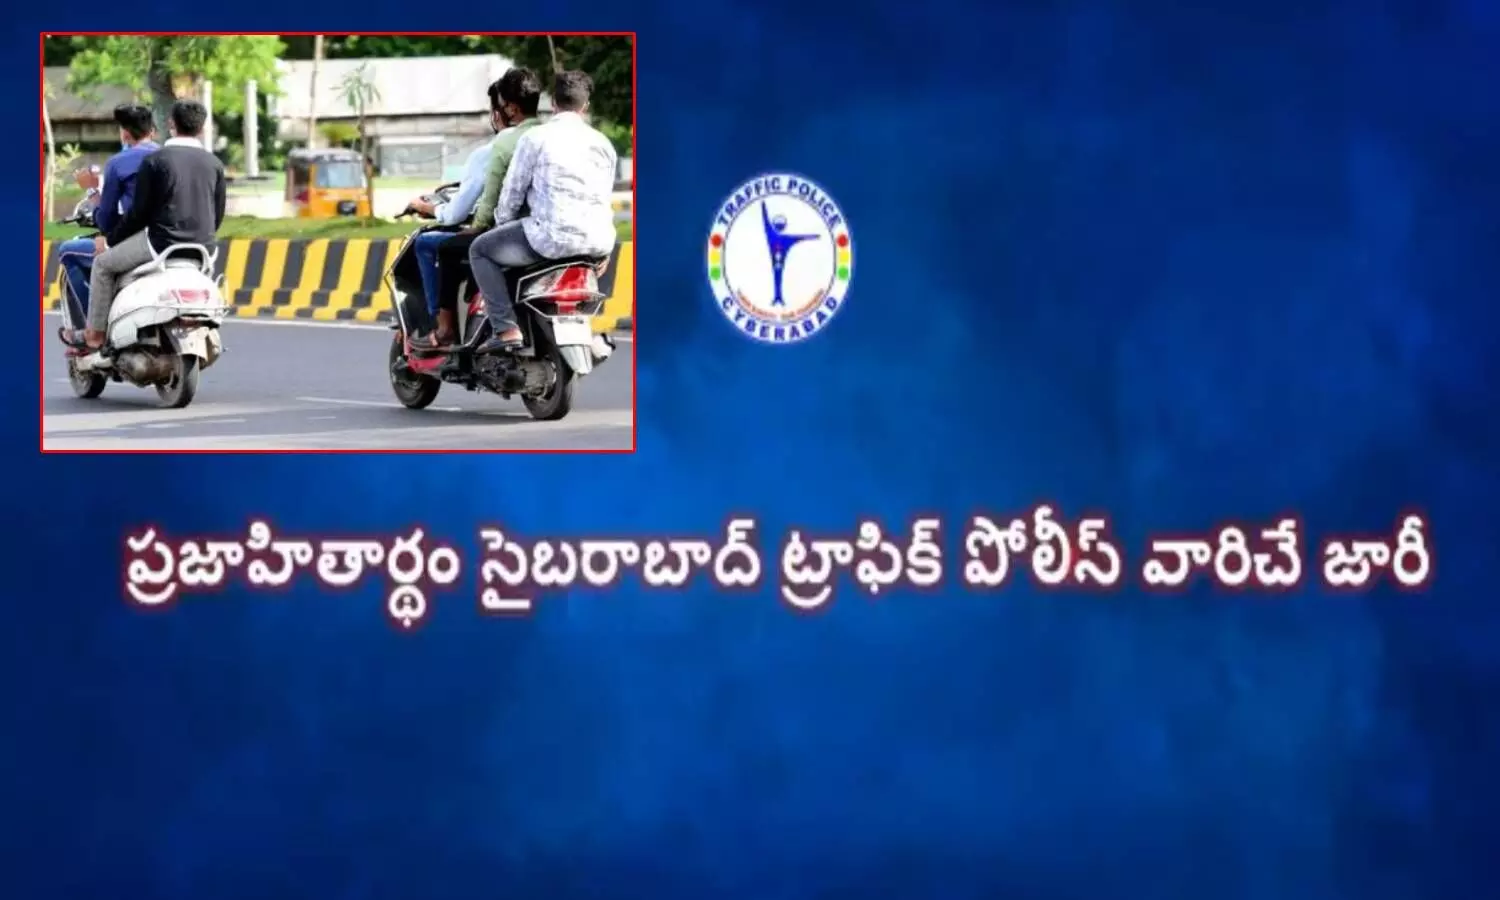 Cyberabad Police strict rules impose to wear helmet